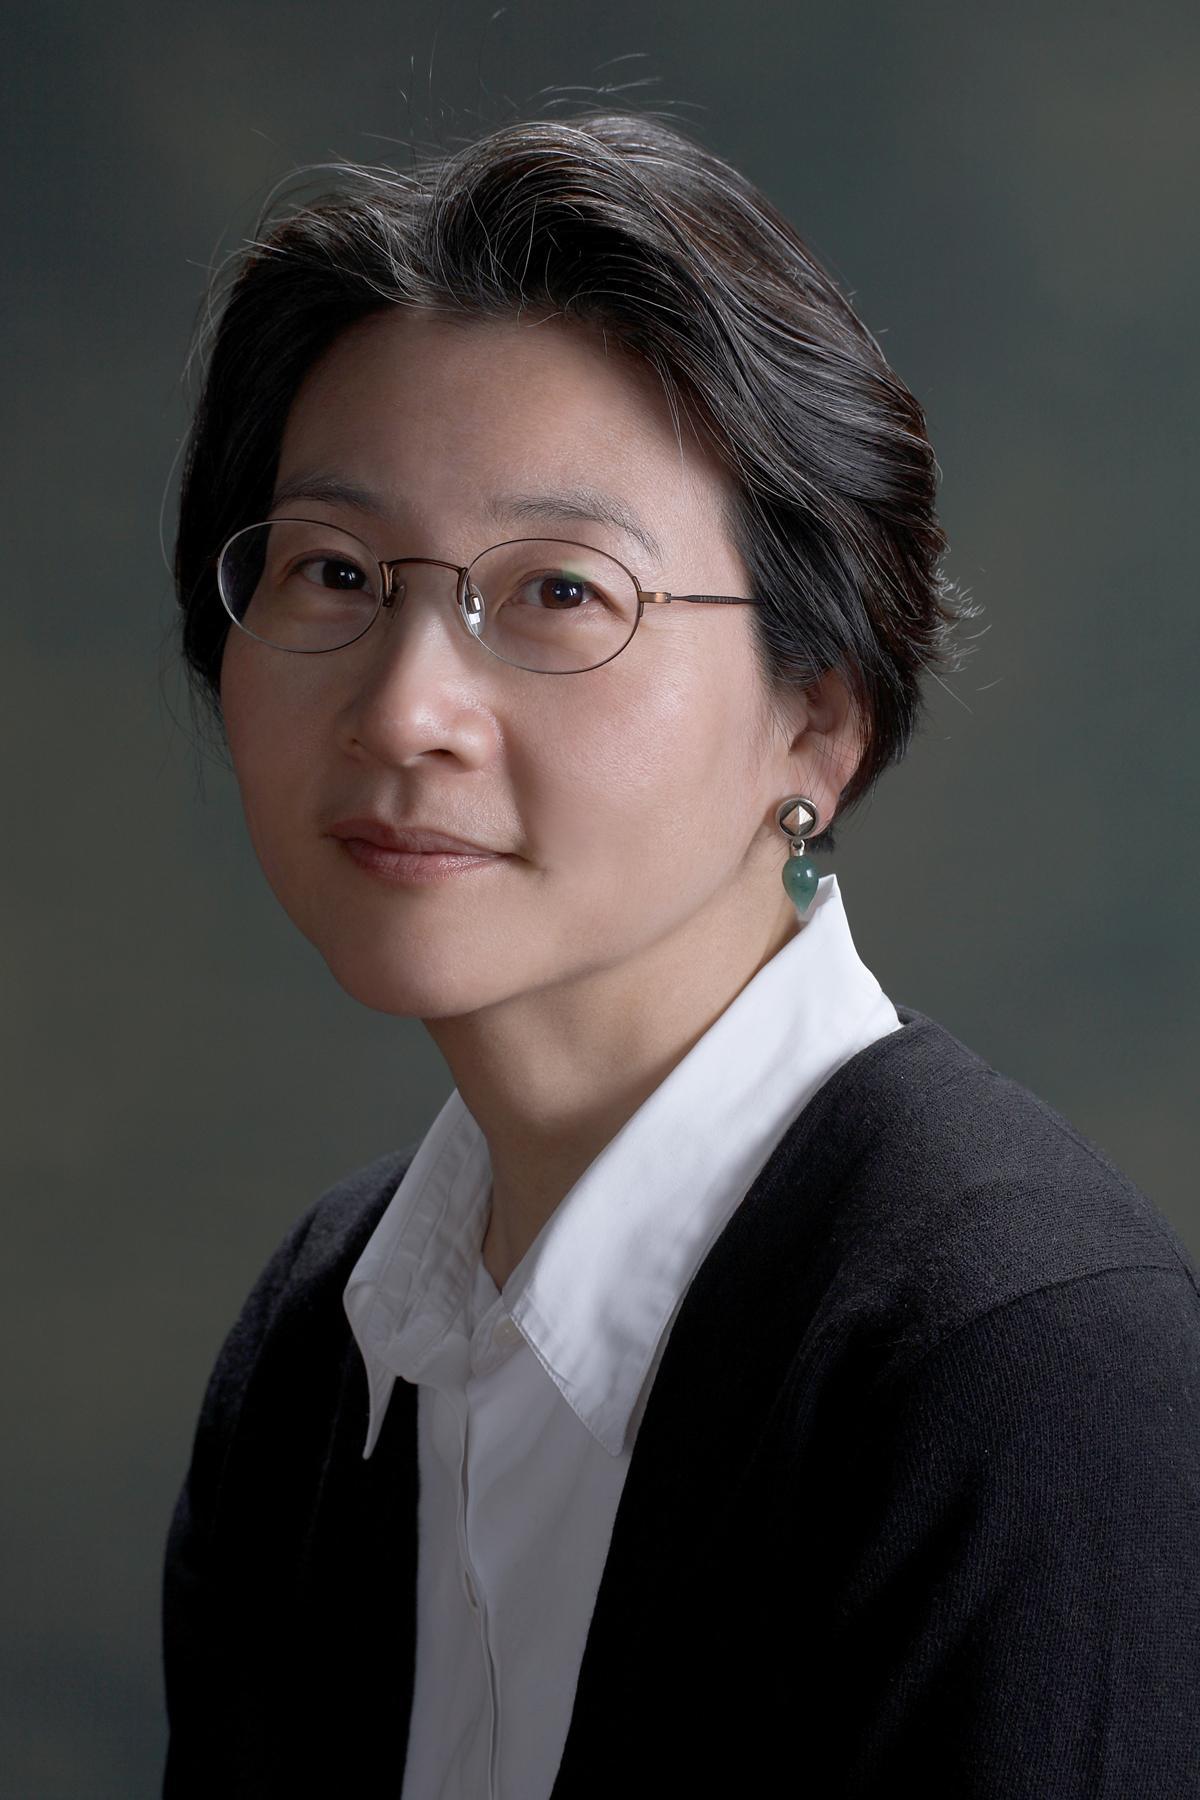 Researcher Kwon, Song taik photo